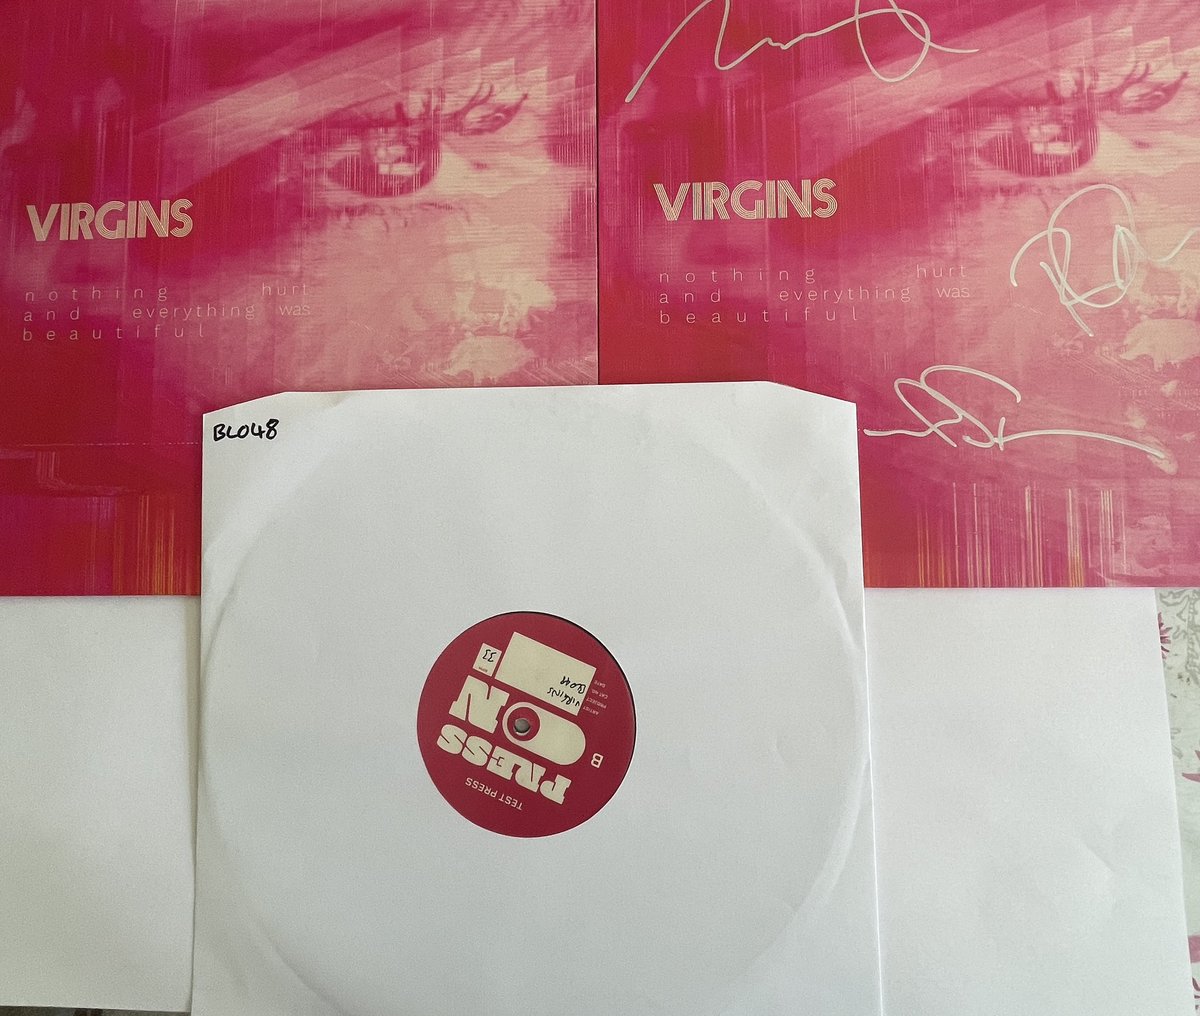 This @bandofvirgins album is so good that one copy is not enough. Cheers @BlowtorchRecs